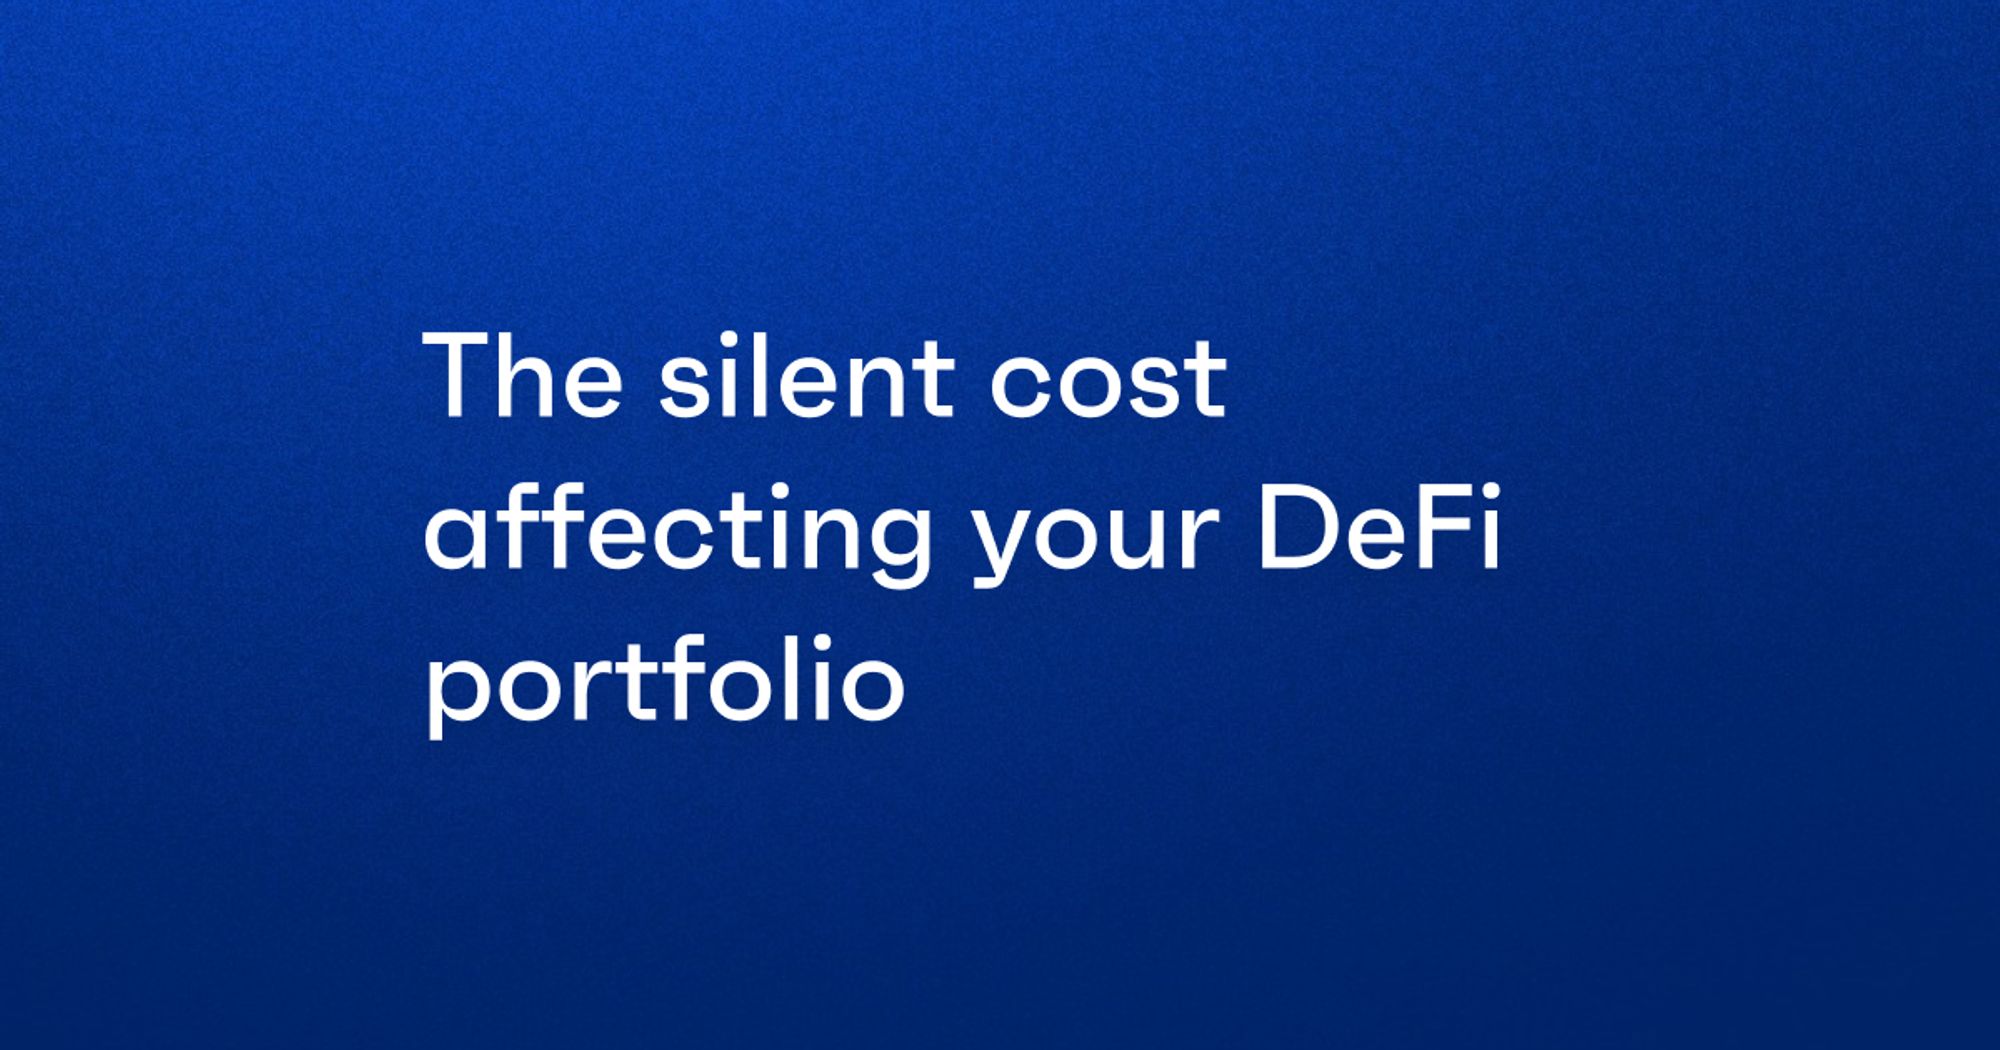 The silent cost affecting your DeFi portfolio blog cover image